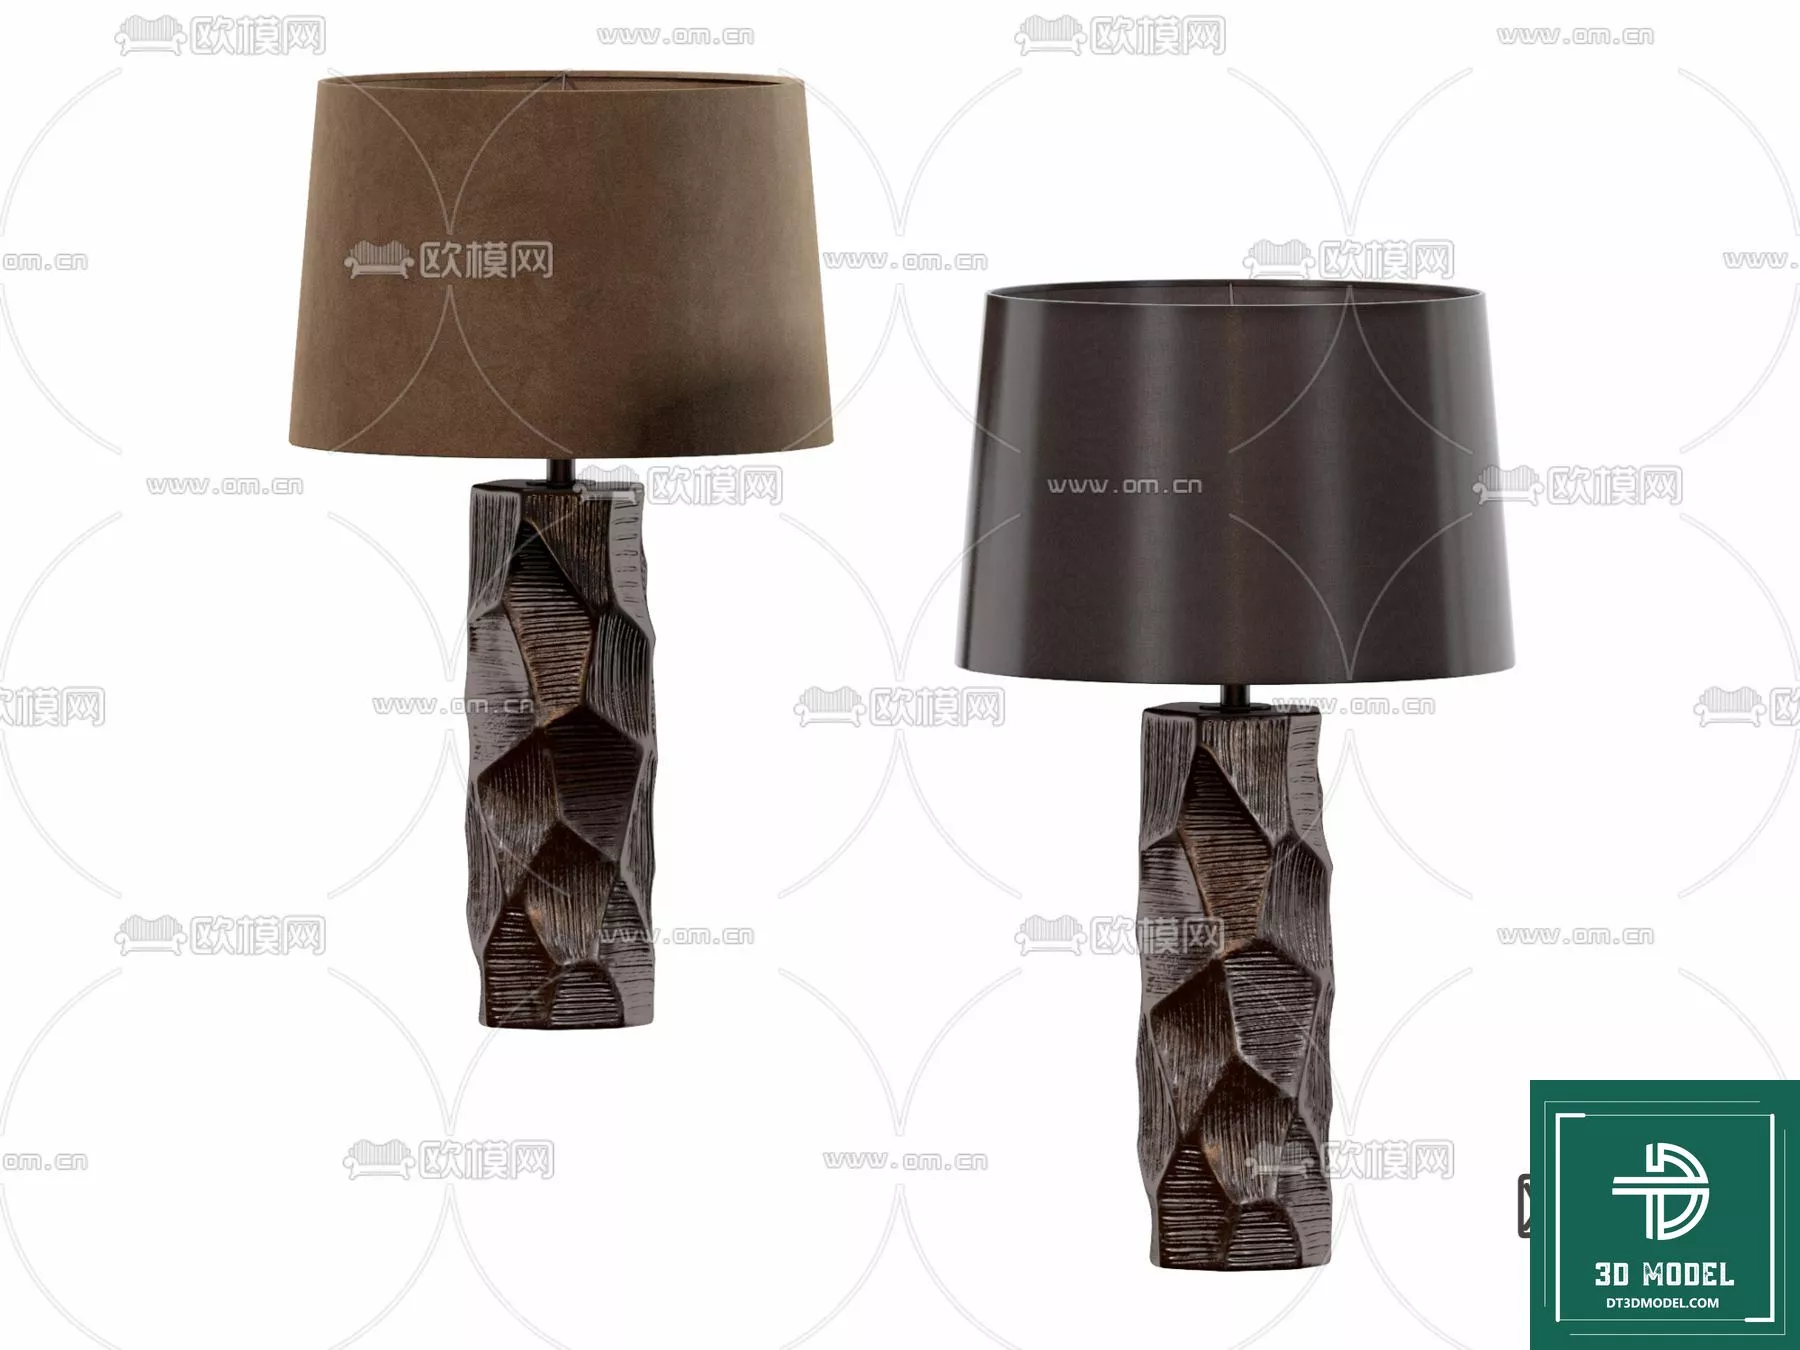 MODERN TABLE LAMP - SKETCHUP 3D MODEL - VRAY OR ENSCAPE - ID14585